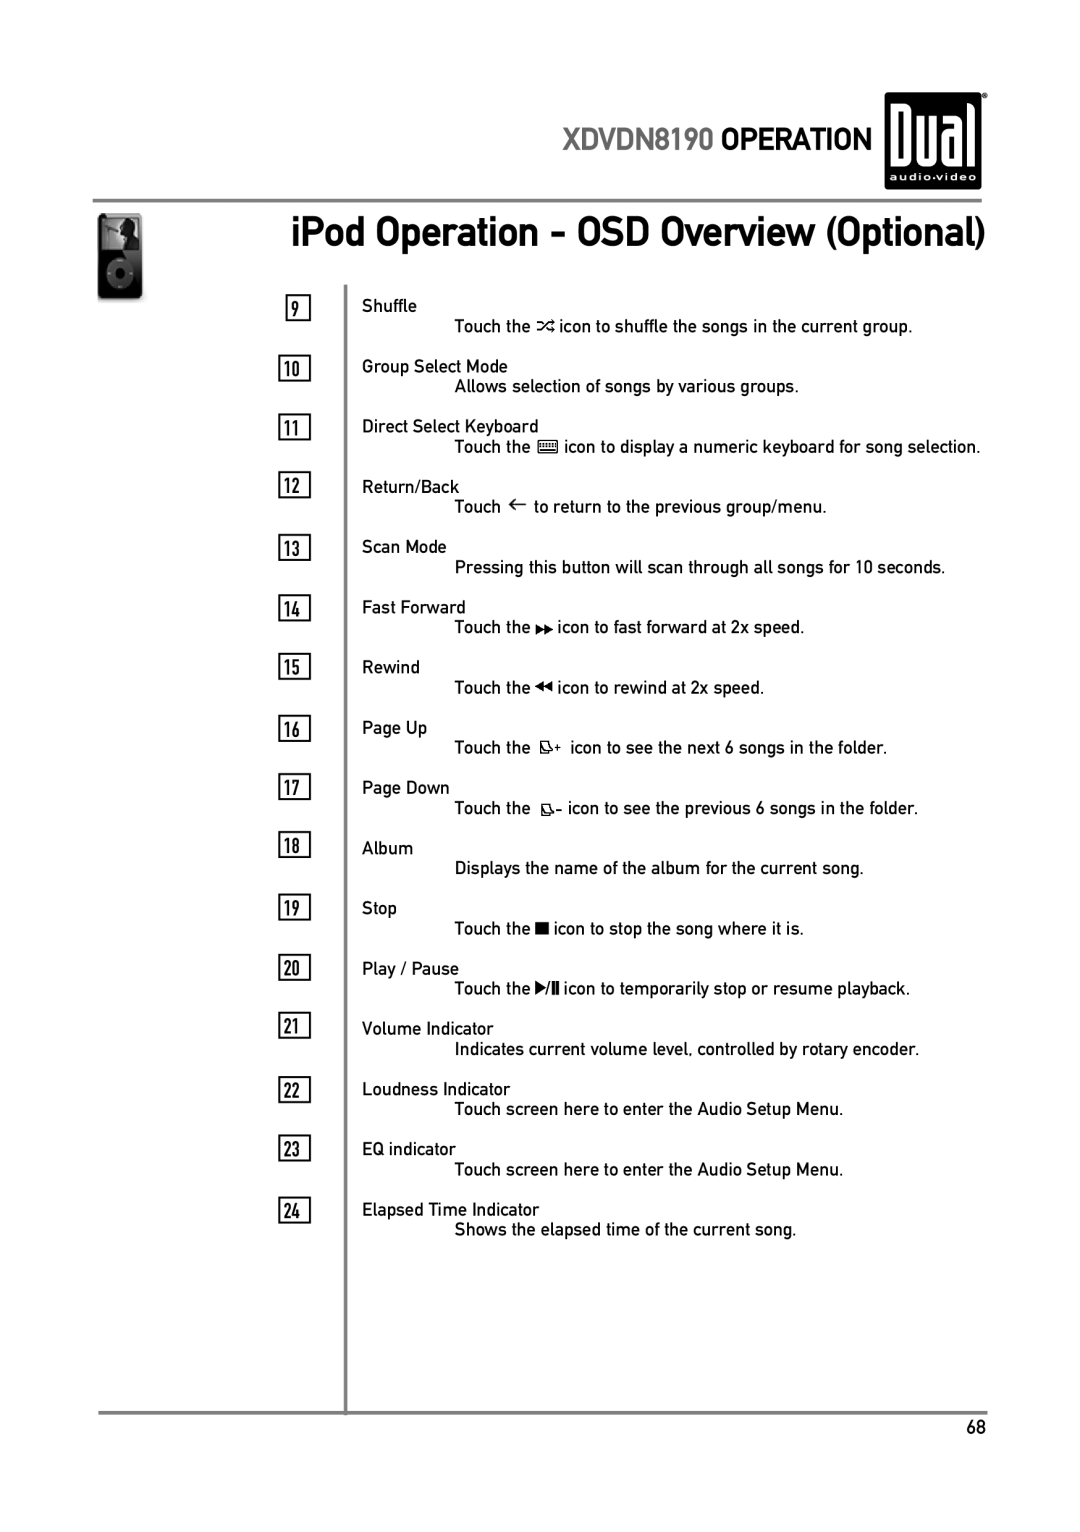 Dual owner manual iPod Operation - OSD Overview Optional, XDVDN8190 OPERATION 